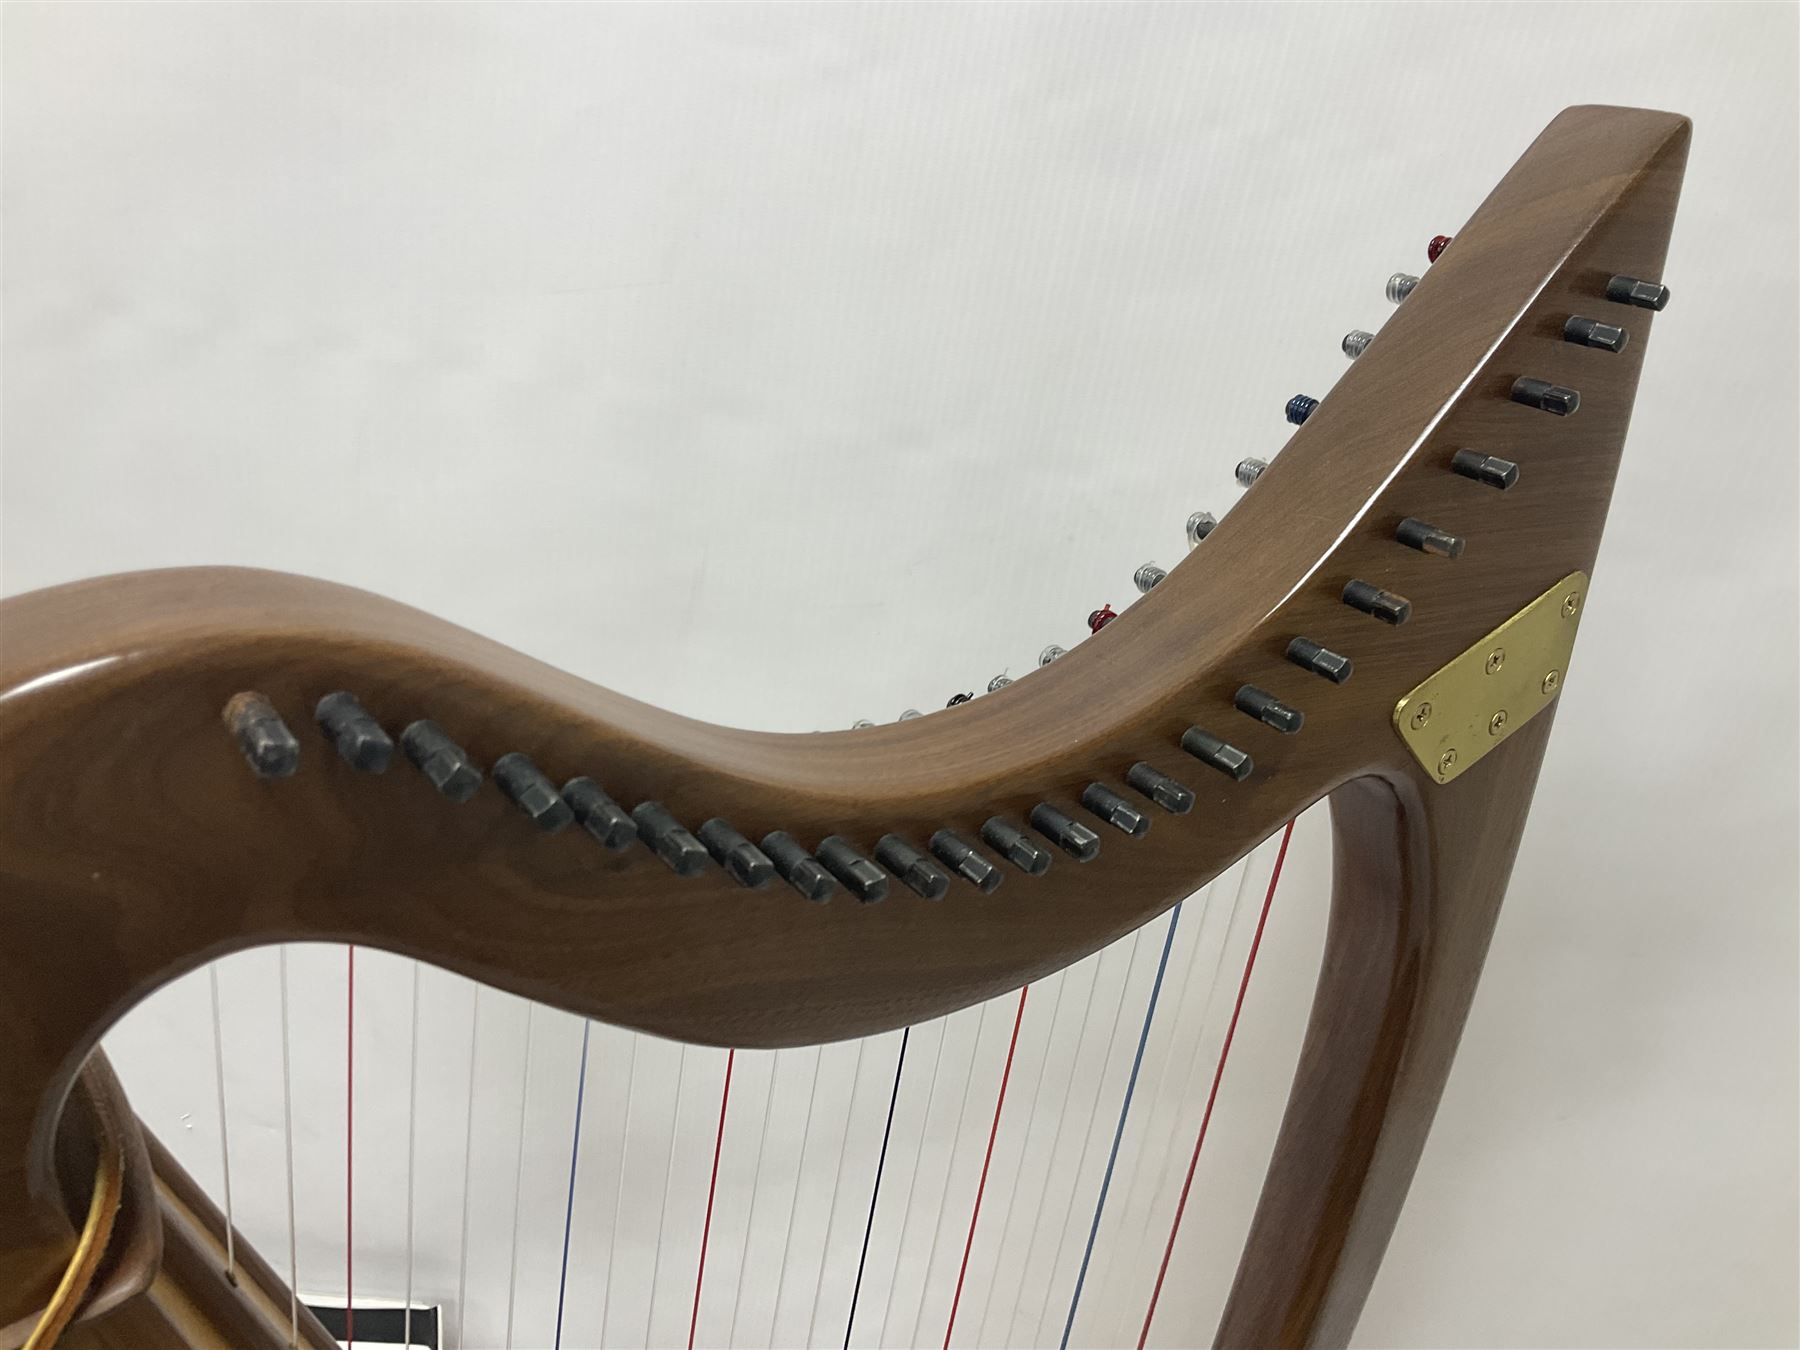 Contemporary 24 string Celtic or Irish Folk Harp with an Ash soundboard and 24 sharpening keys - Image 11 of 15